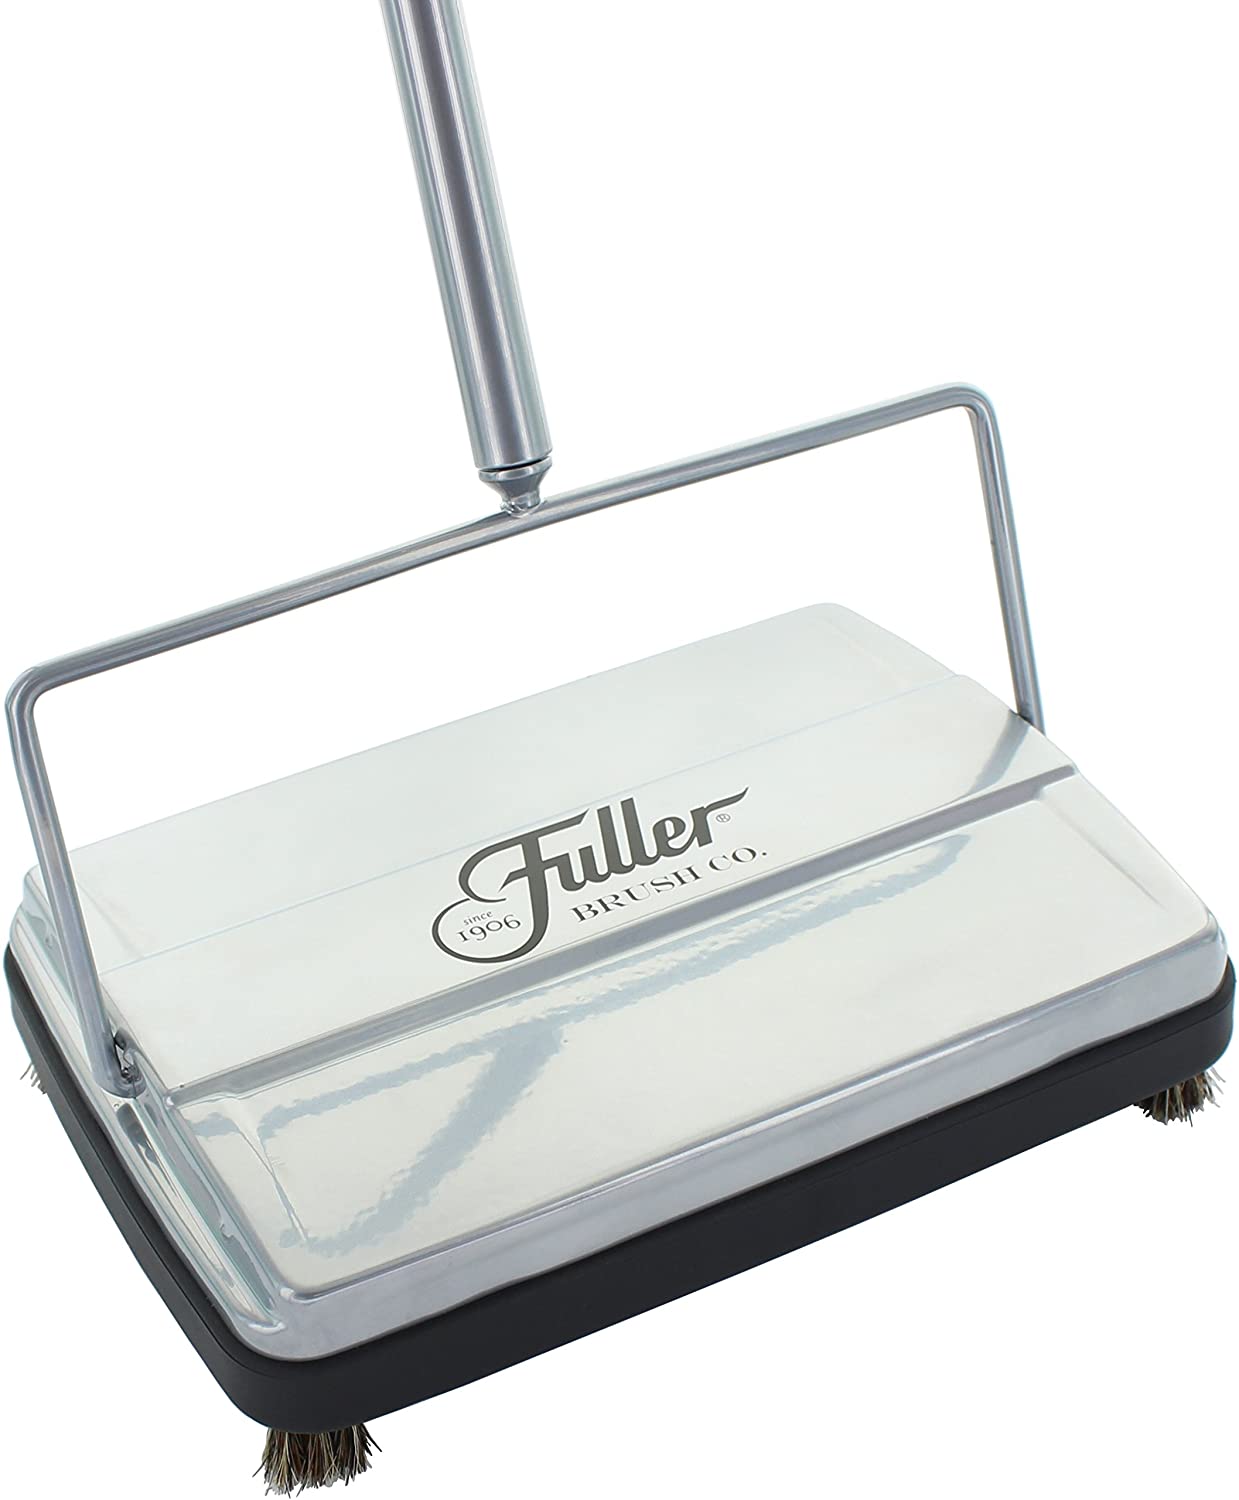 Fuller Brush 17052 Electrostatic Carpet & Floor Sweeper - 9 Cleaning Path  - Lightweight - Ideal for Crumby Messes - Works On Carpets & Hard Floor  Surfaces Red 